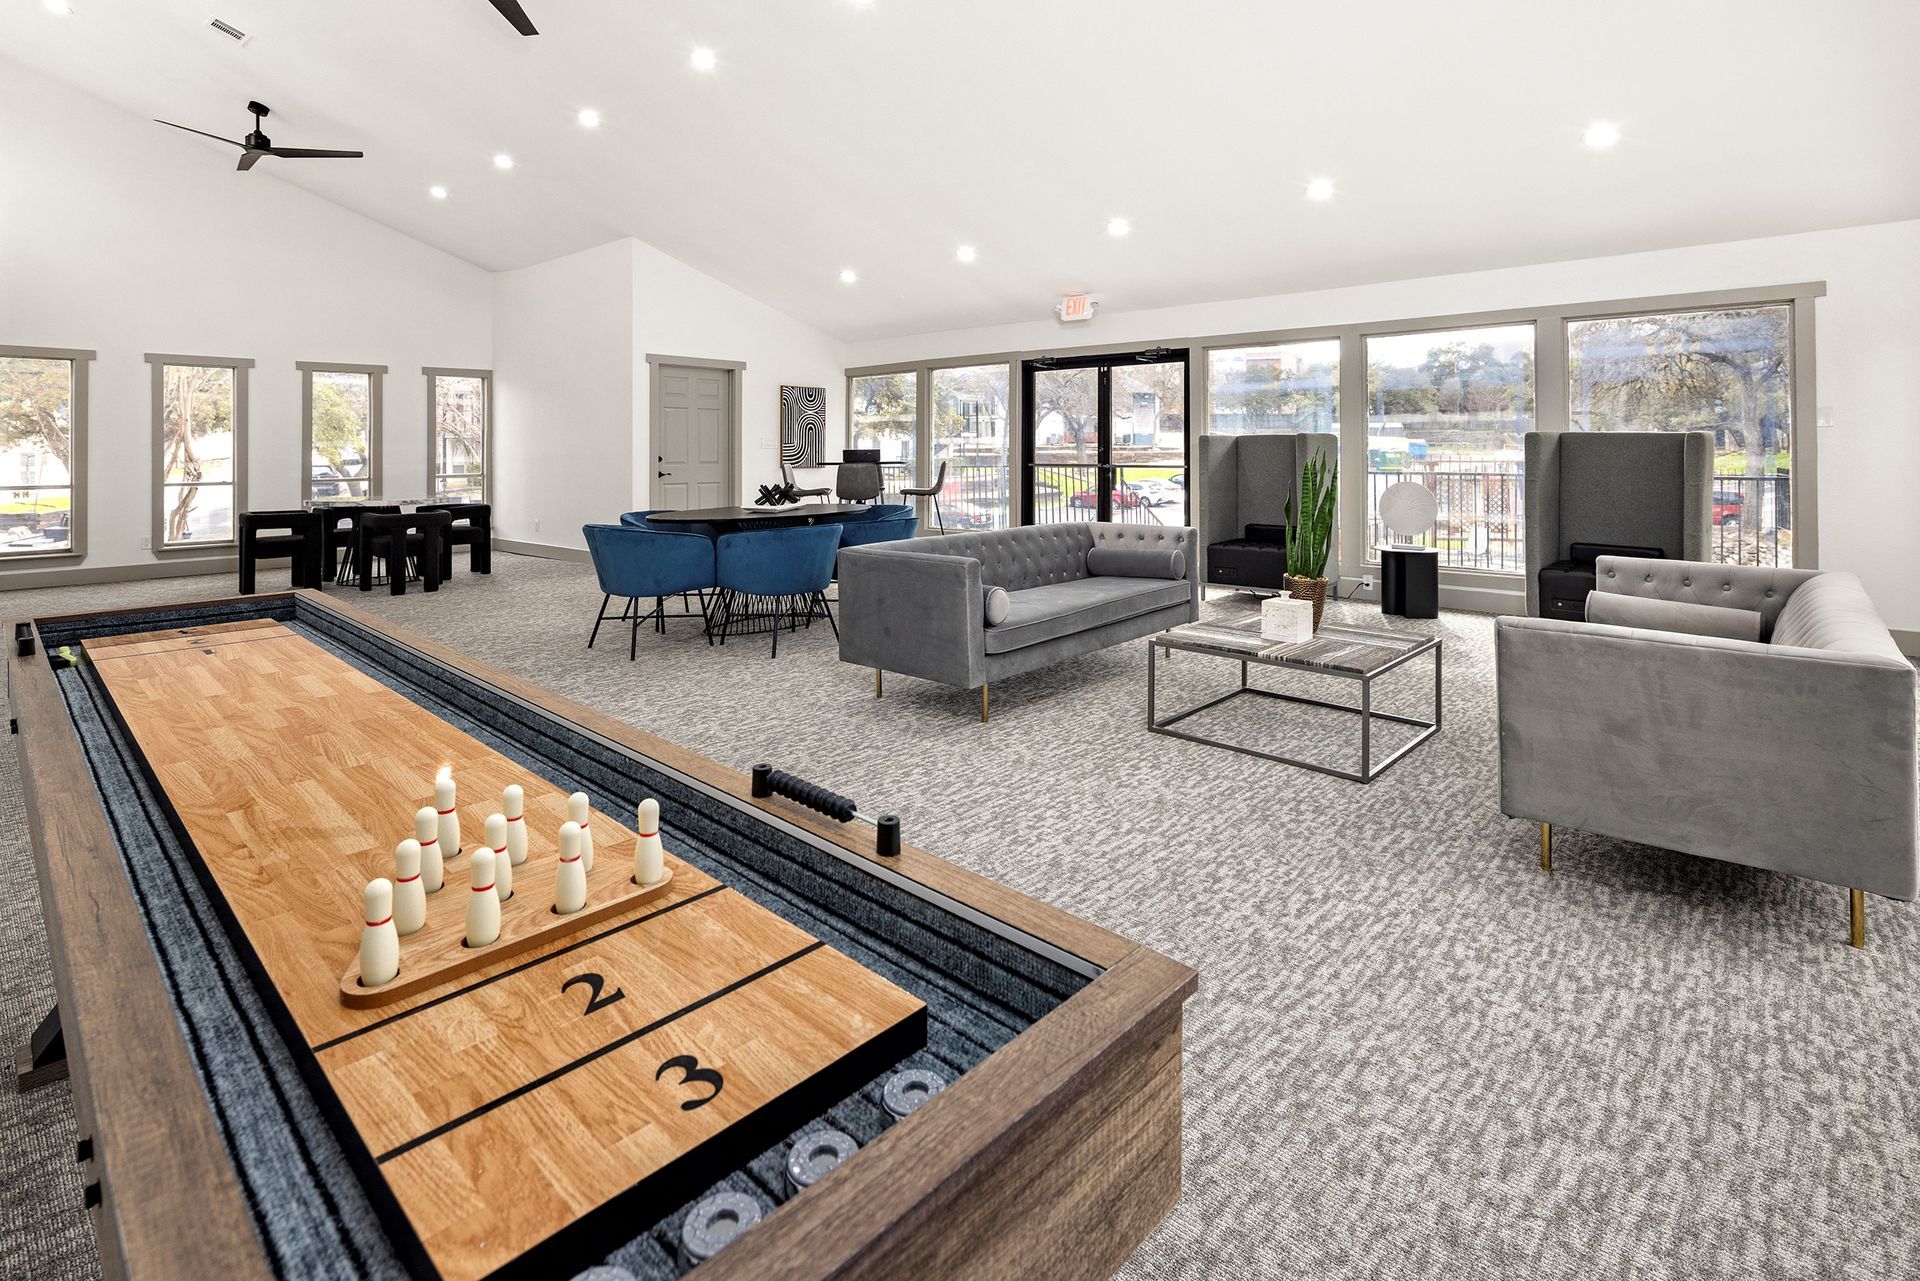 A clubhouse room with a pool table, couch, table, and chairs.